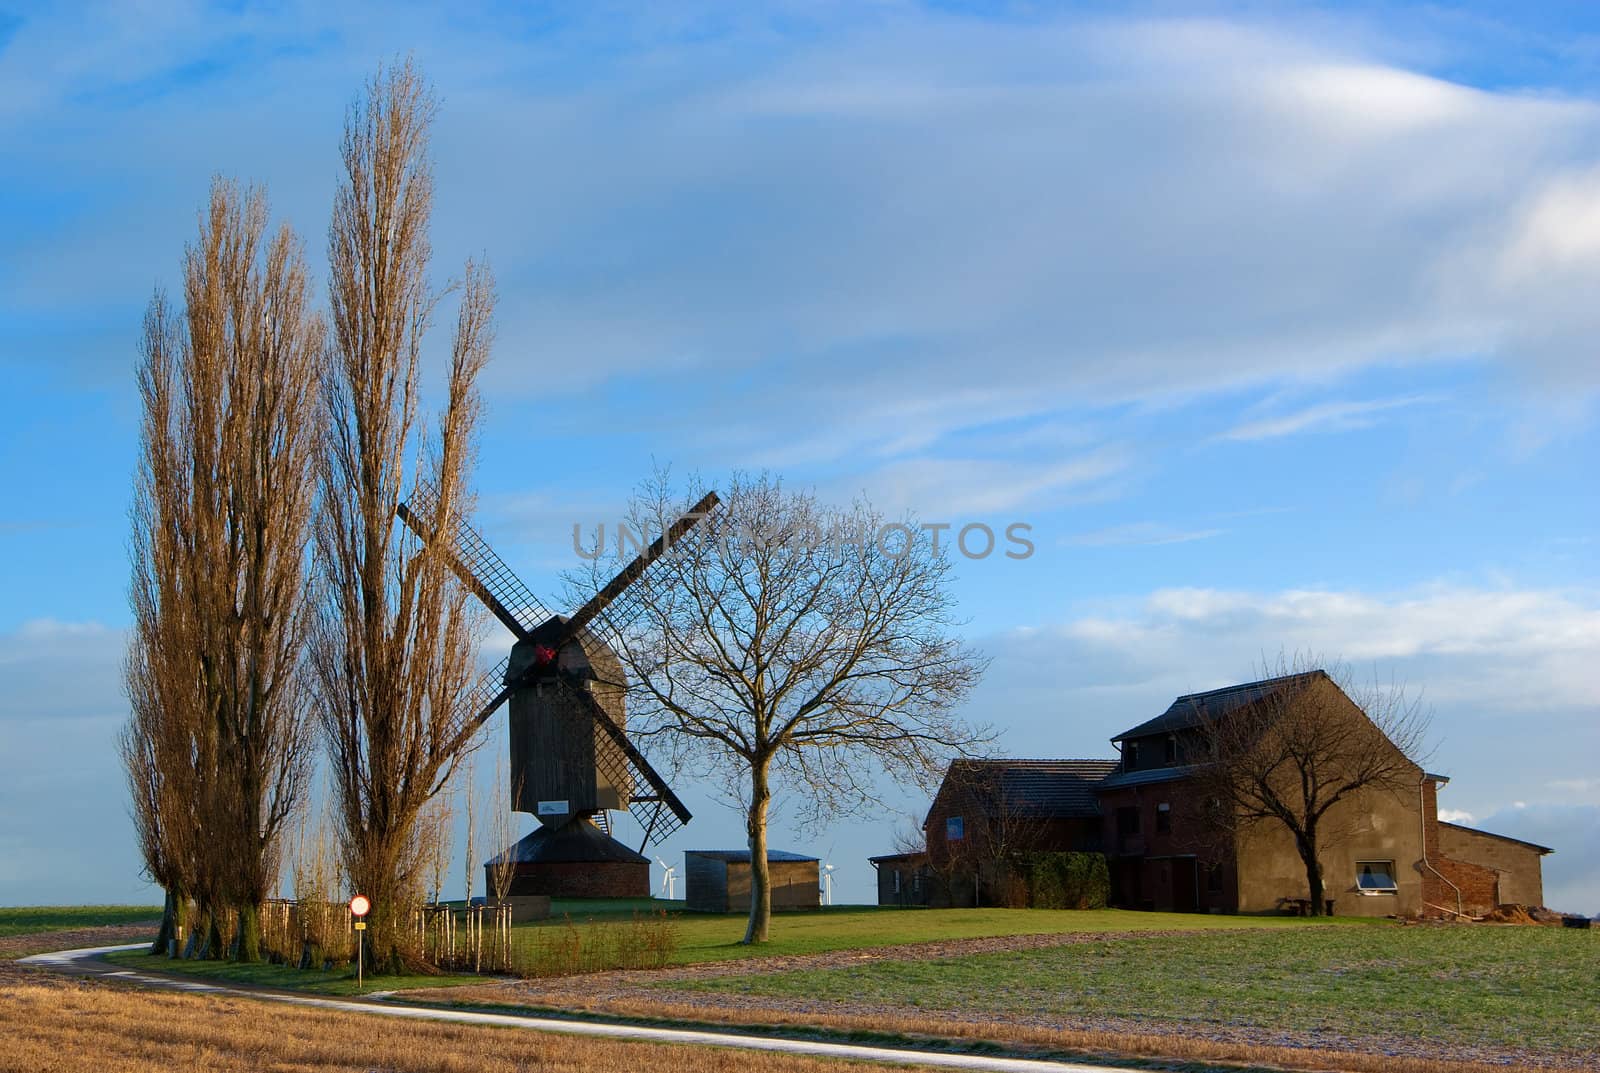 Morning light,field, traditional windmill and house